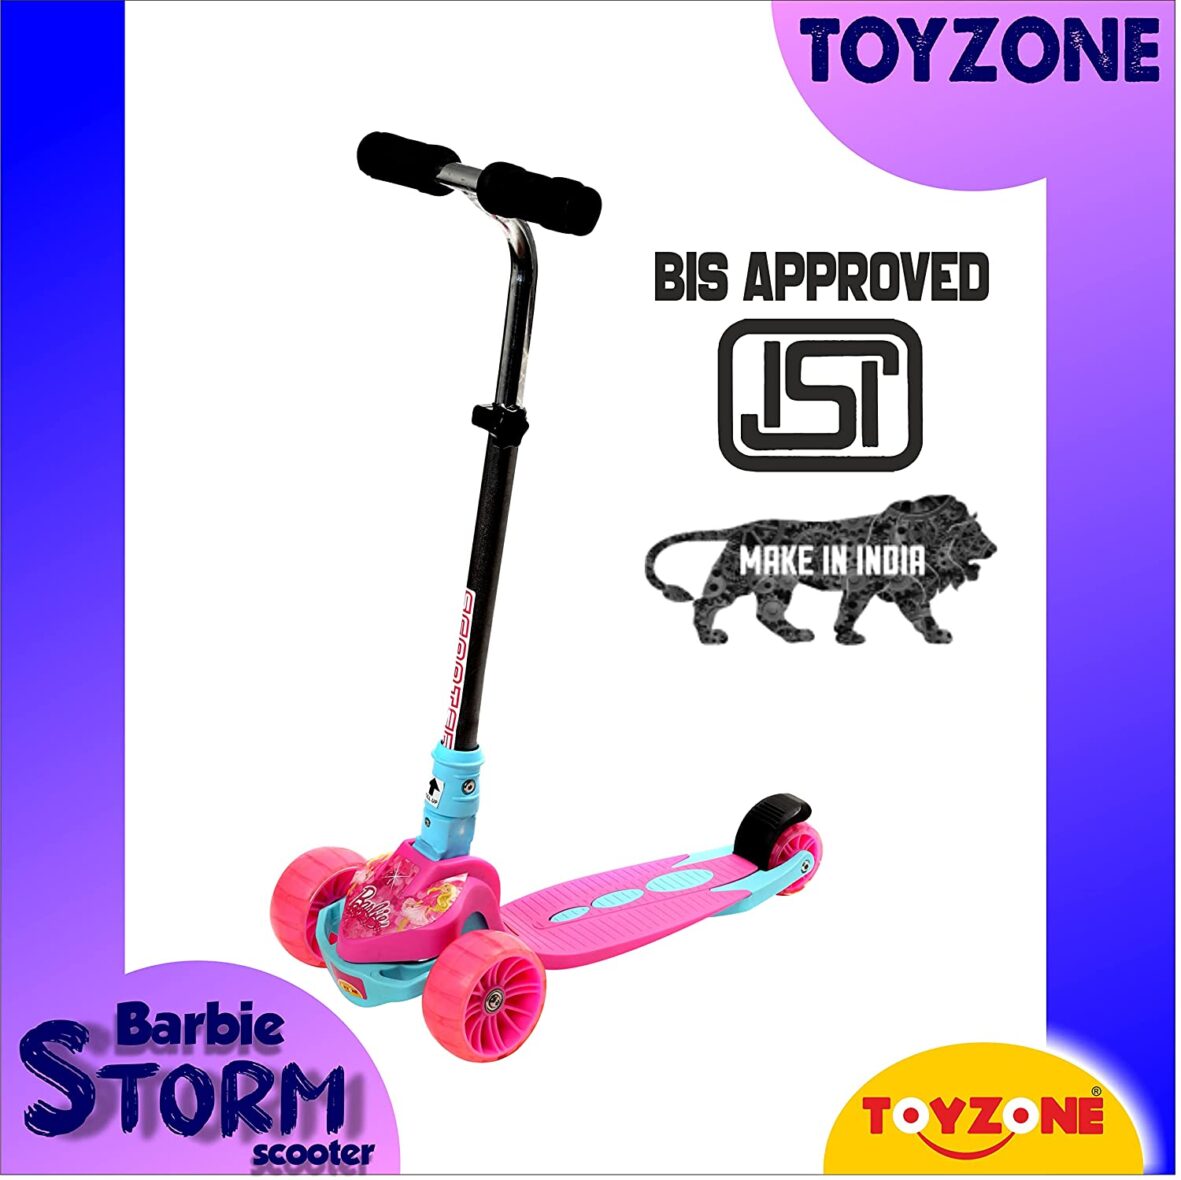 Toyzone Scooter Storm  Kids Skate Ride on  Smart Kick Scooter  Adjustable Height and Rear Brake  Foldable Scooter  for Kids Age 6+ Years Visit the Toyzone Store